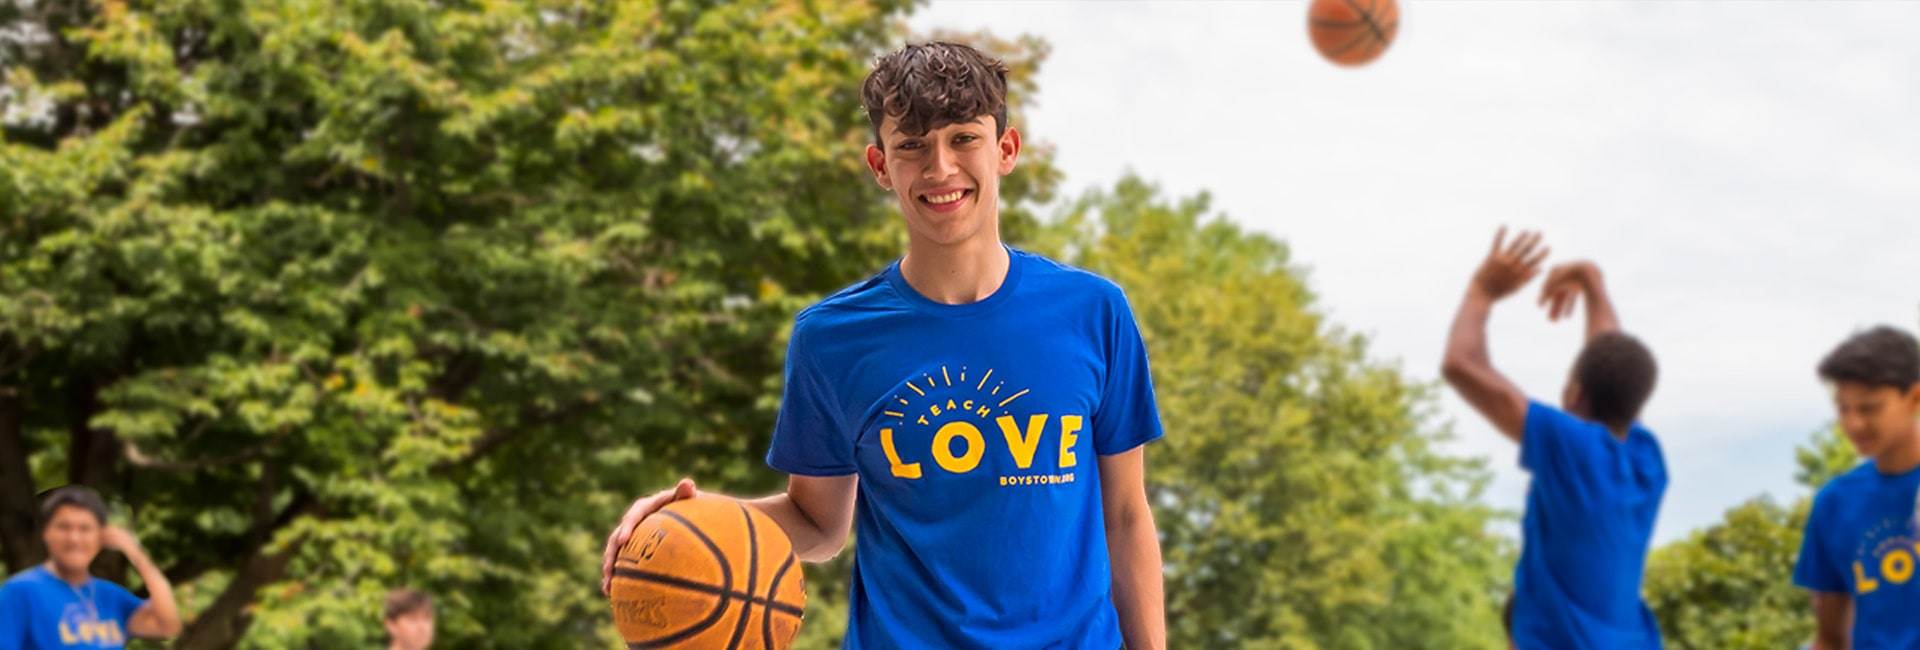 Kids Playing Basketball in Teach Love T-shirts